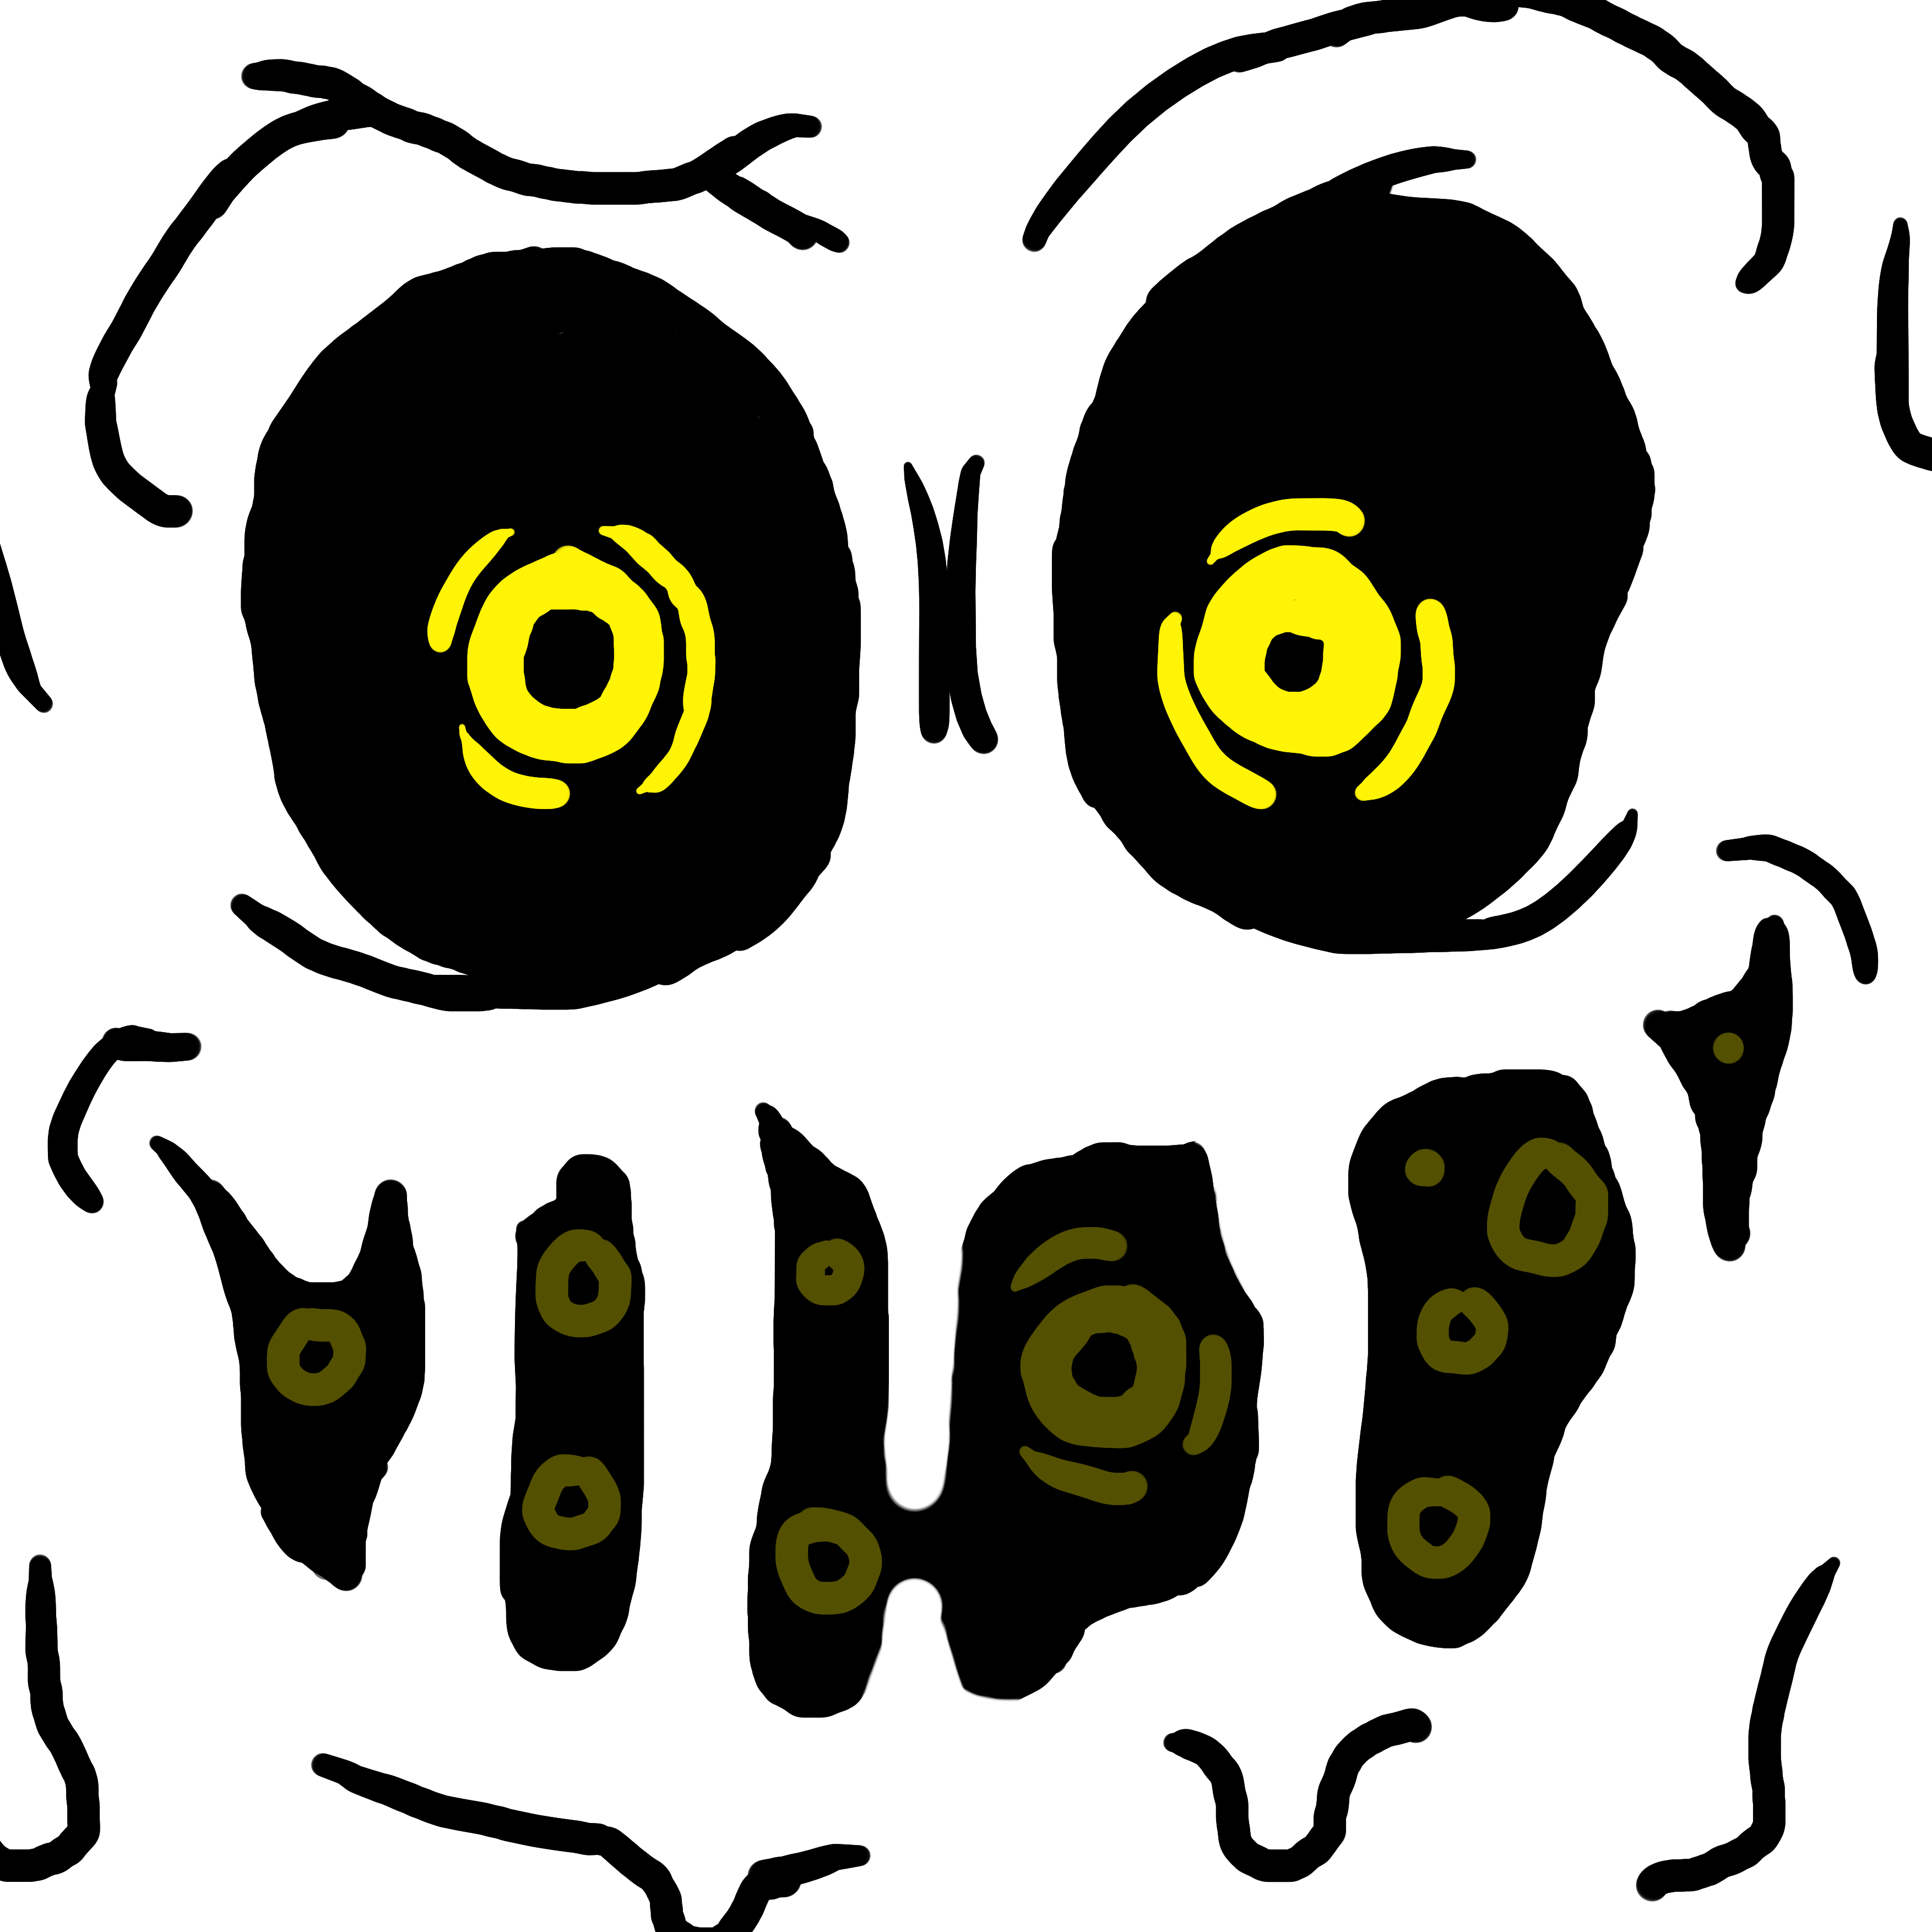 An icon of Delirium from the The Binding of Isaac, created by Ethan Edelen.